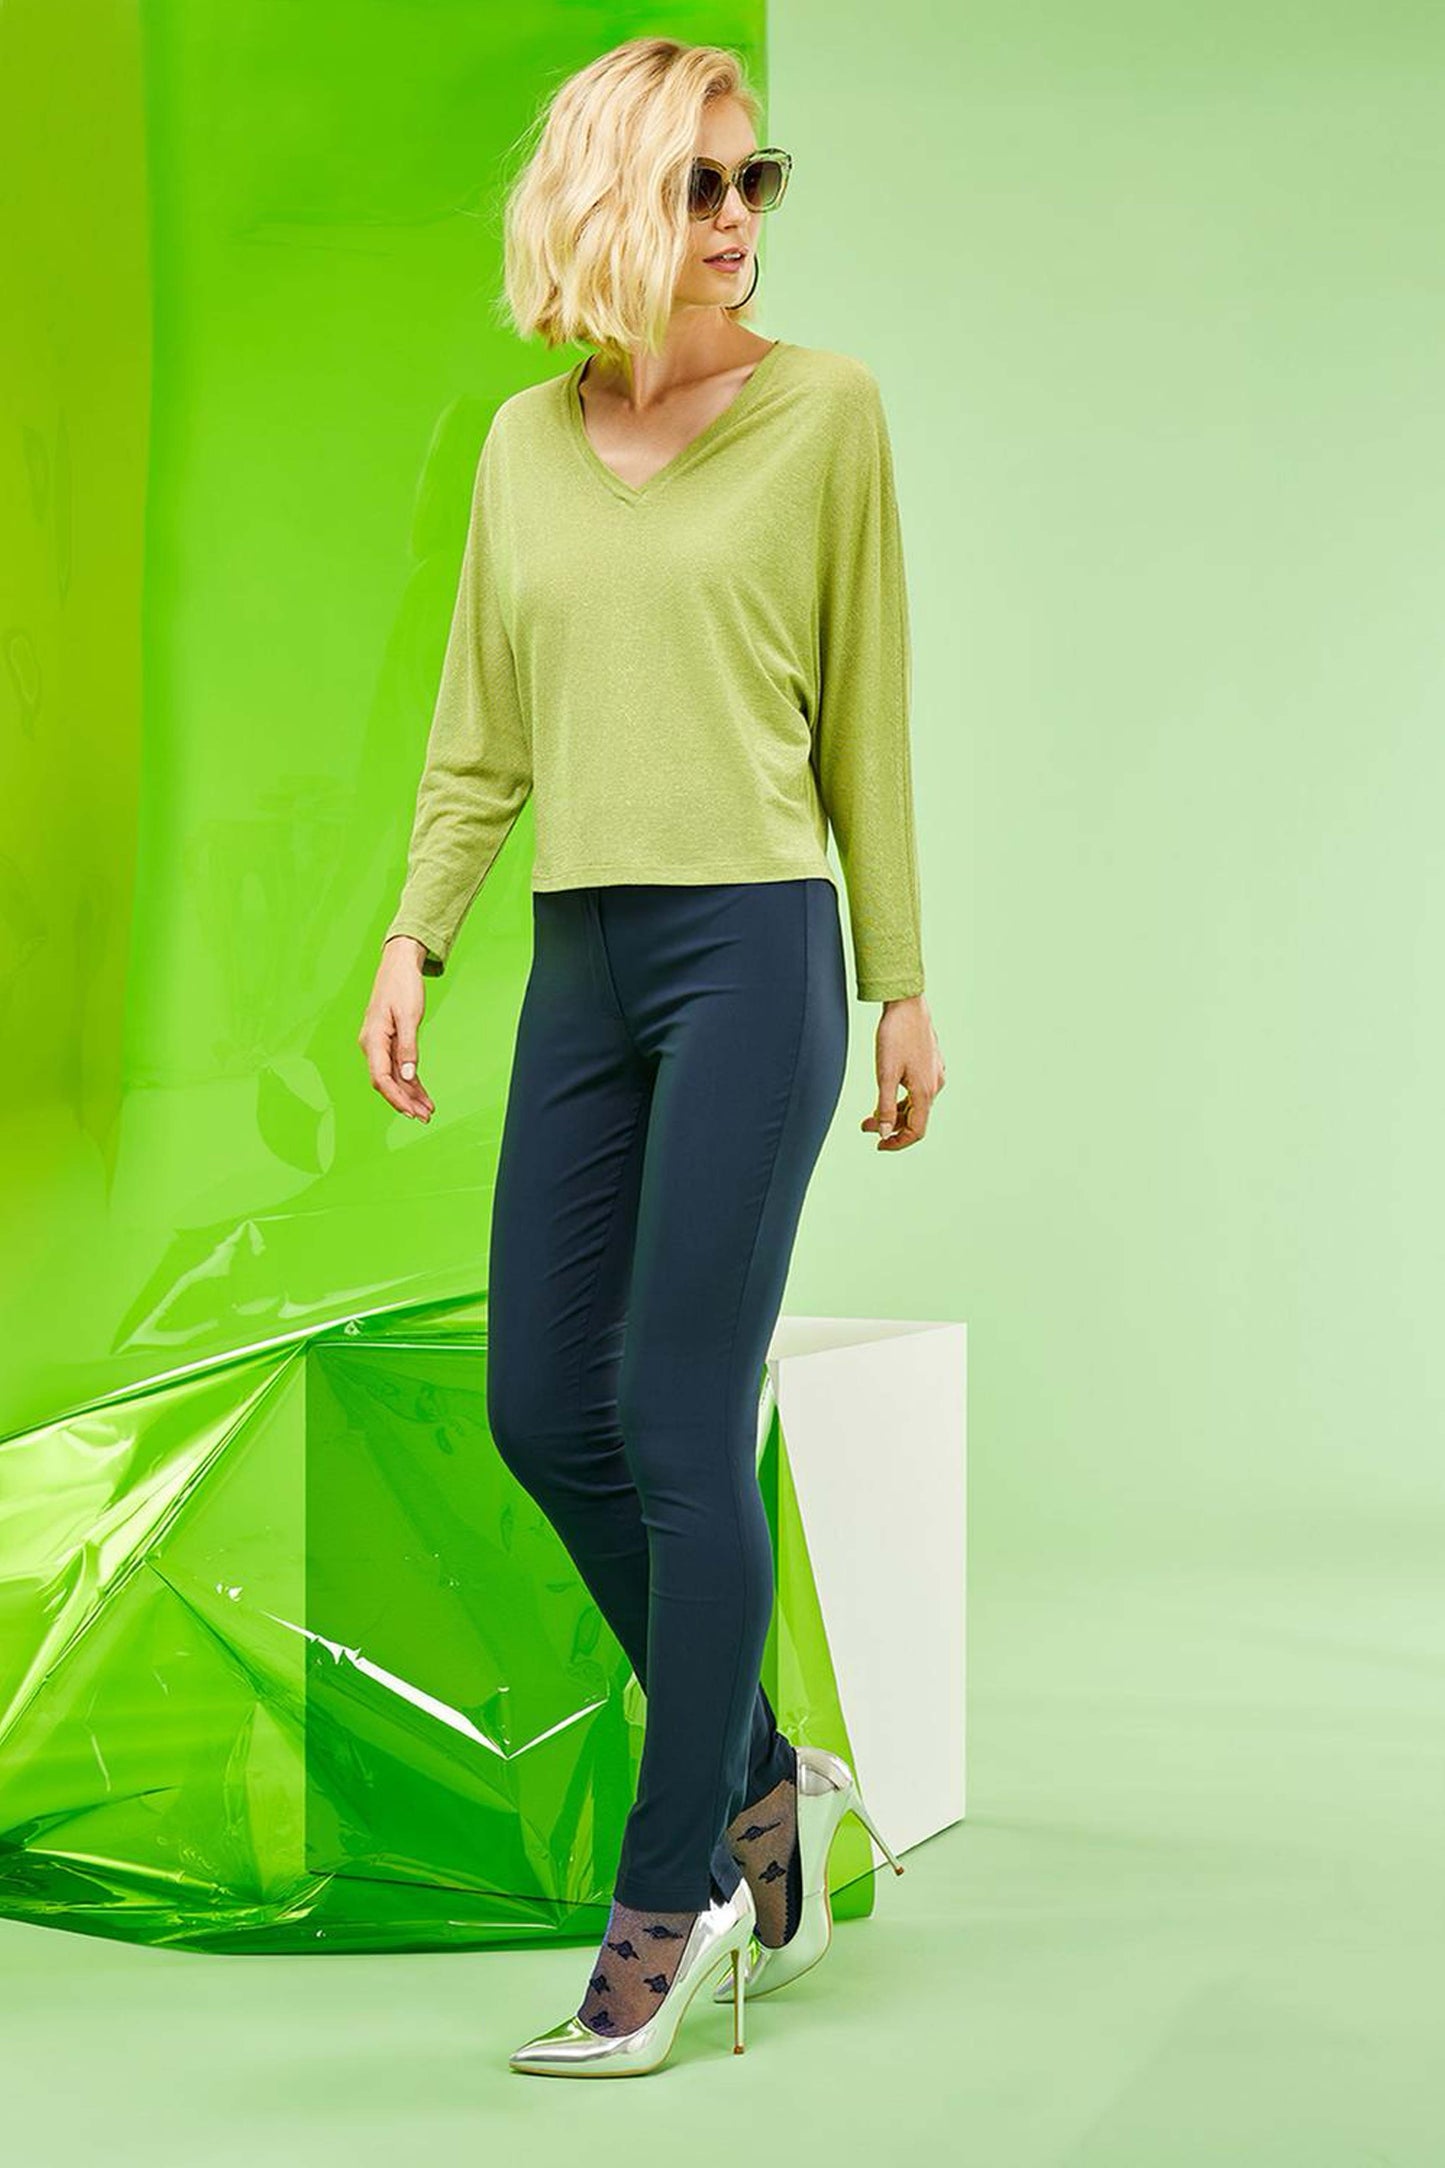 SiSi Belt Treggings - Navy blue light weight high waisted stretch viscose trouser leggings (treggings), with 2 buttons and zip closure and matching belt. Worn by a female model with short blonde hair, sunglasses, lime green top, sparkly socks and silver stiletto heels.